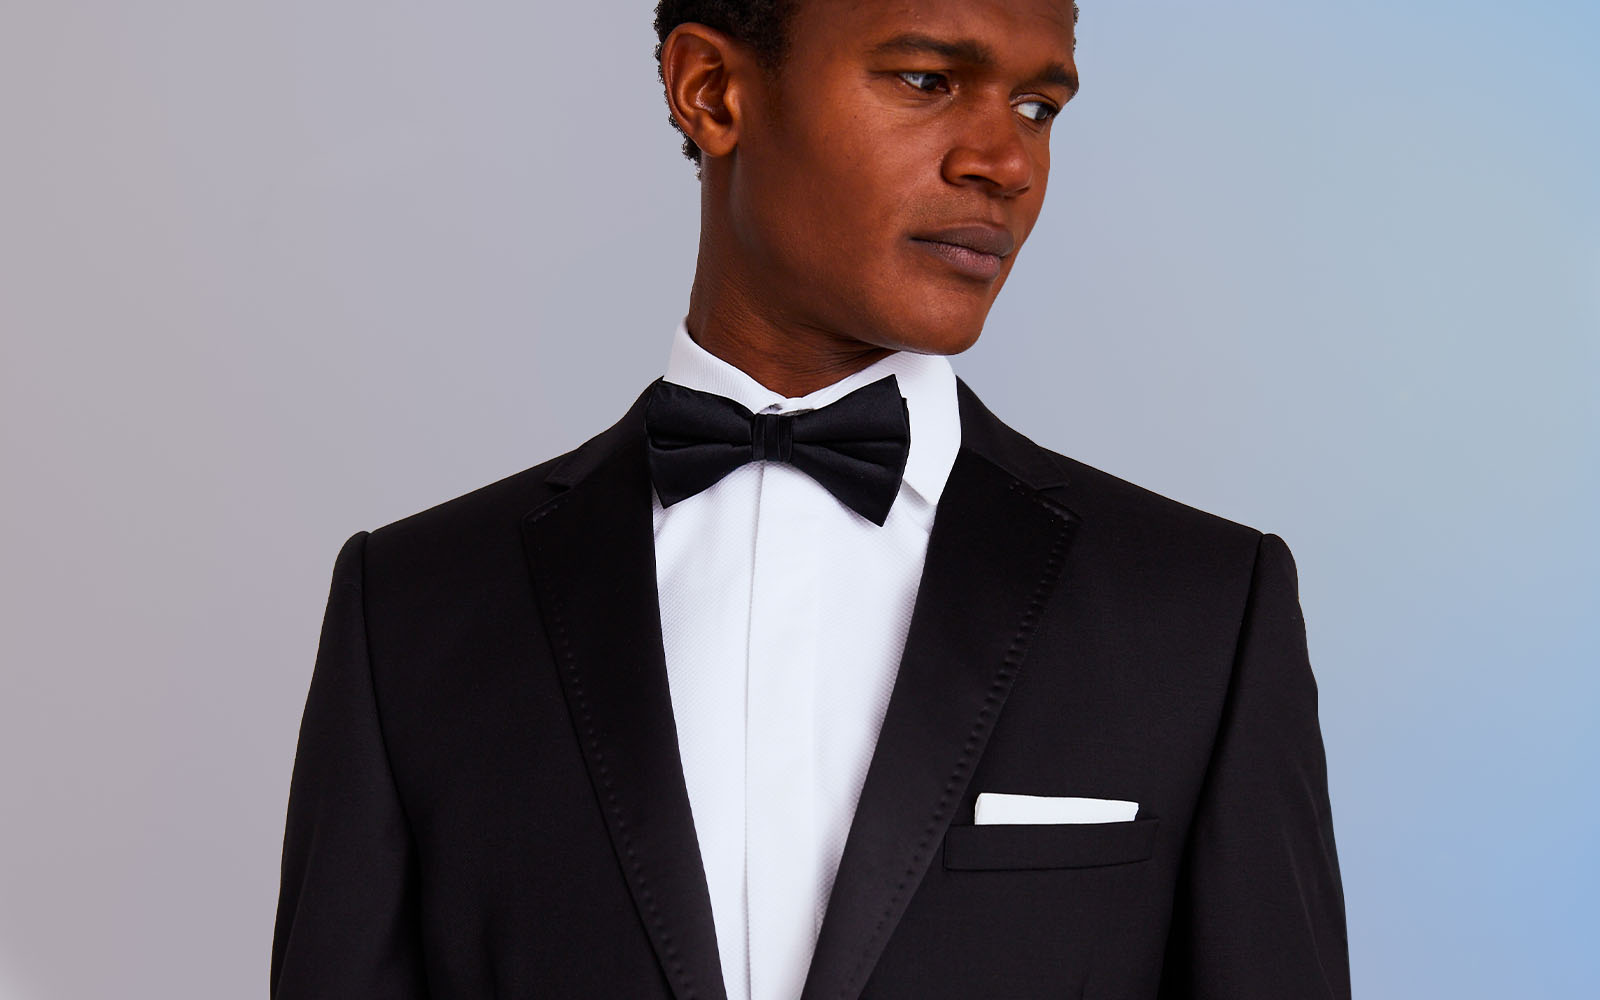 Black tie weddings: crack the sacred dress code with our tips for men